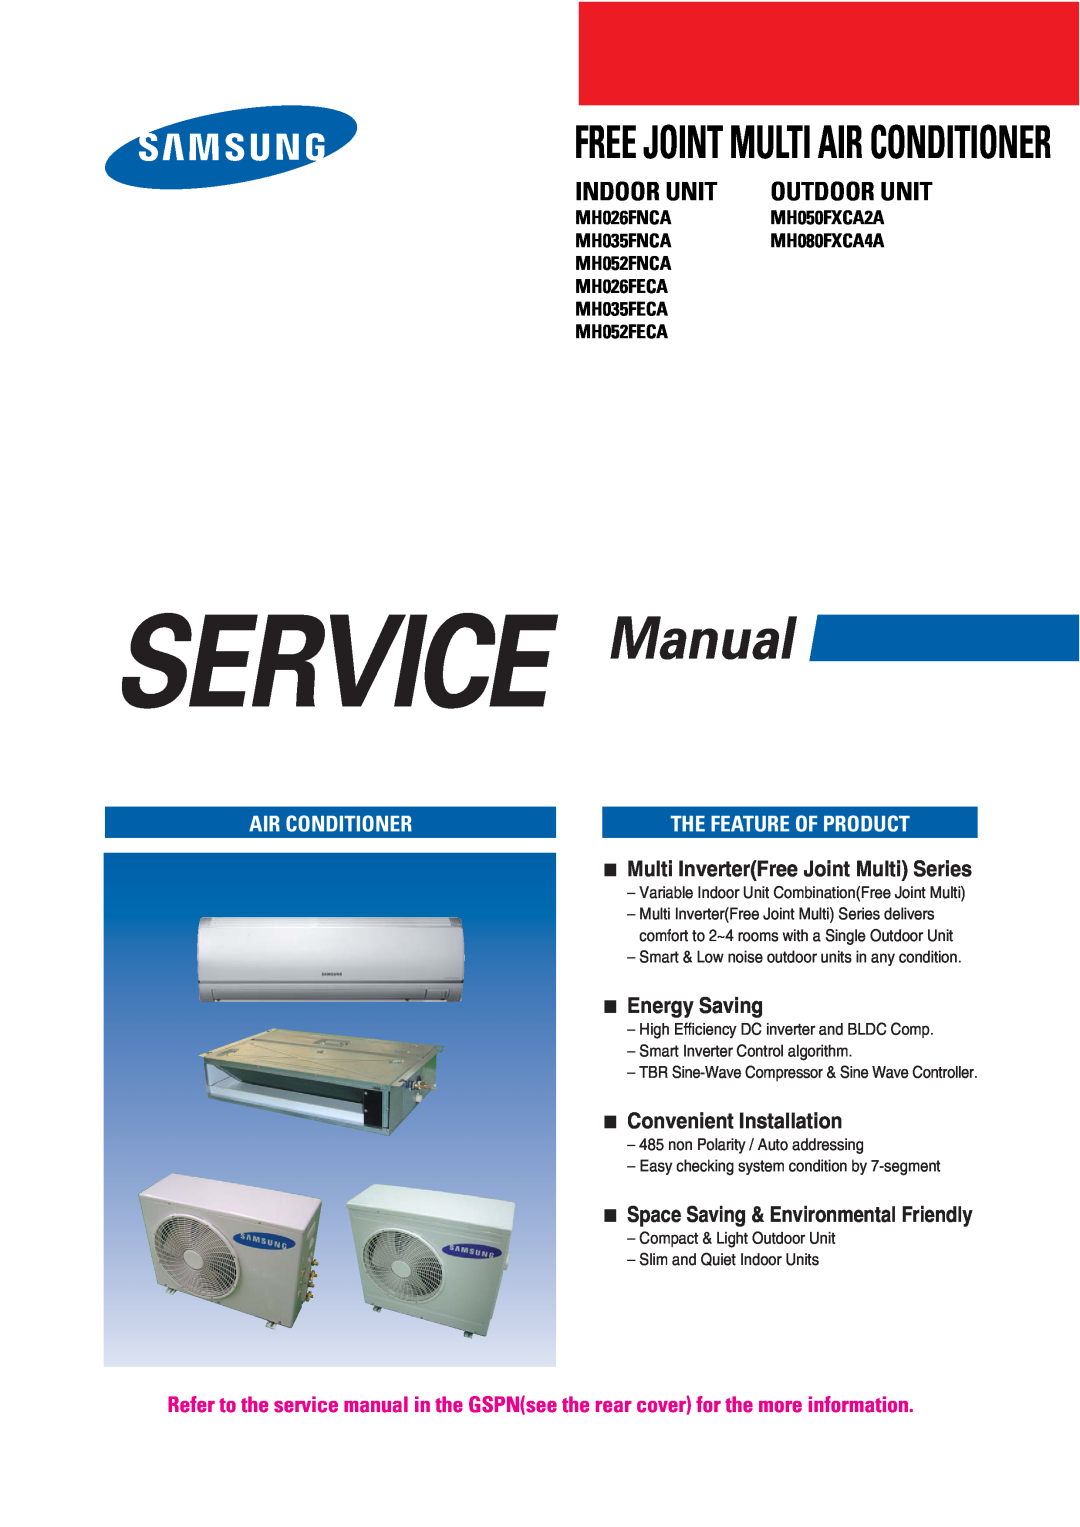 Samsung MH026FNCA service manual Indoor Unit, Free Joint Multi Air Conditioner, The Feature Of Product, Energy Saving 